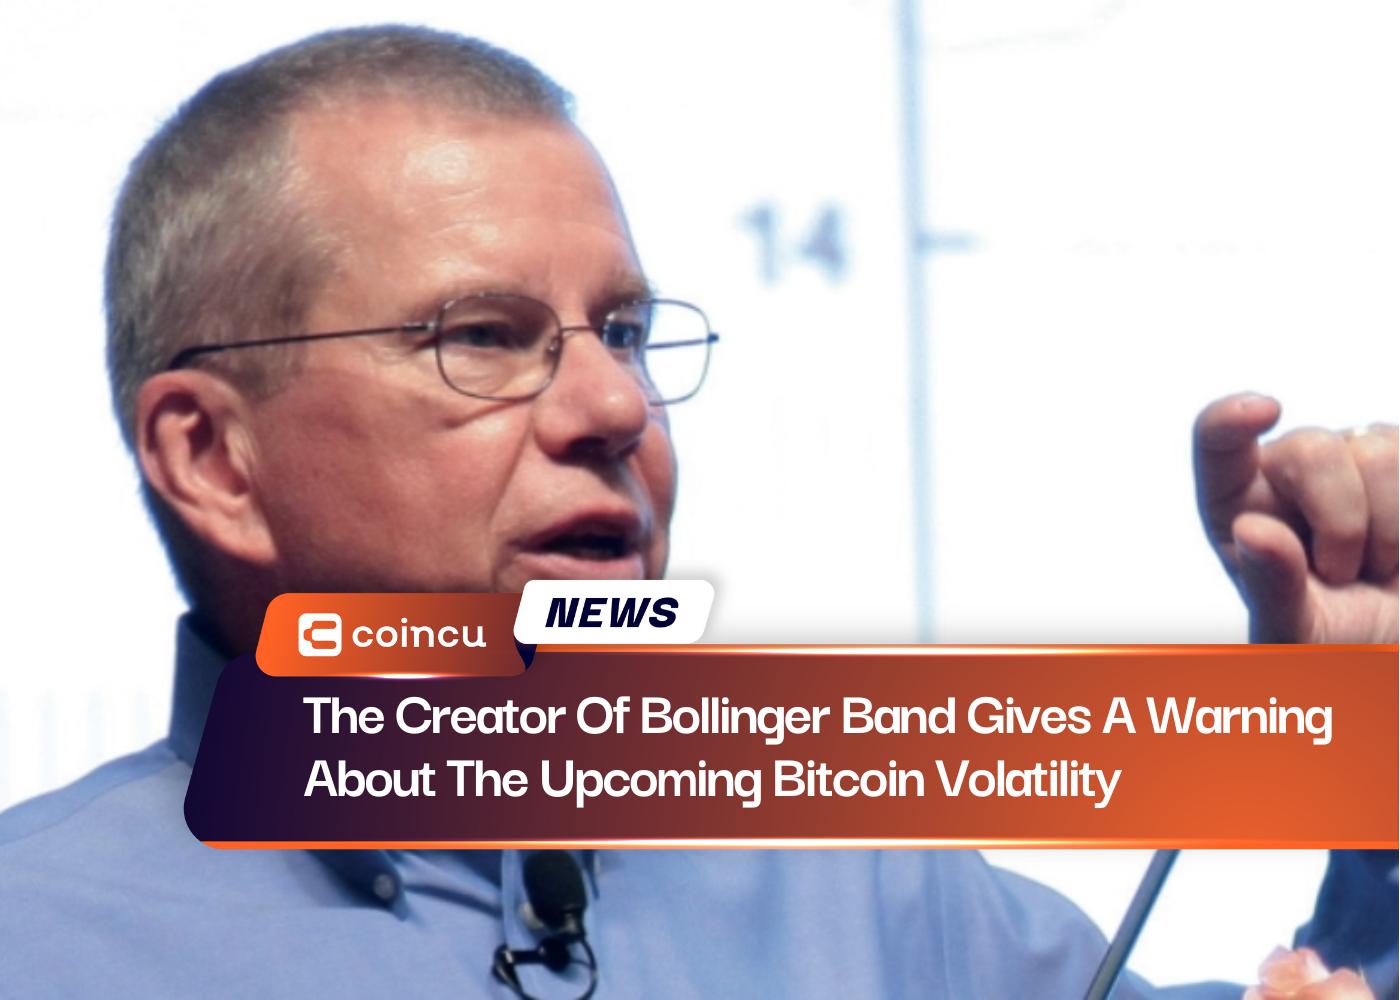 The Creator Of Bollinger Band Gives A Warning About The Upcoming Bitcoin Volatility